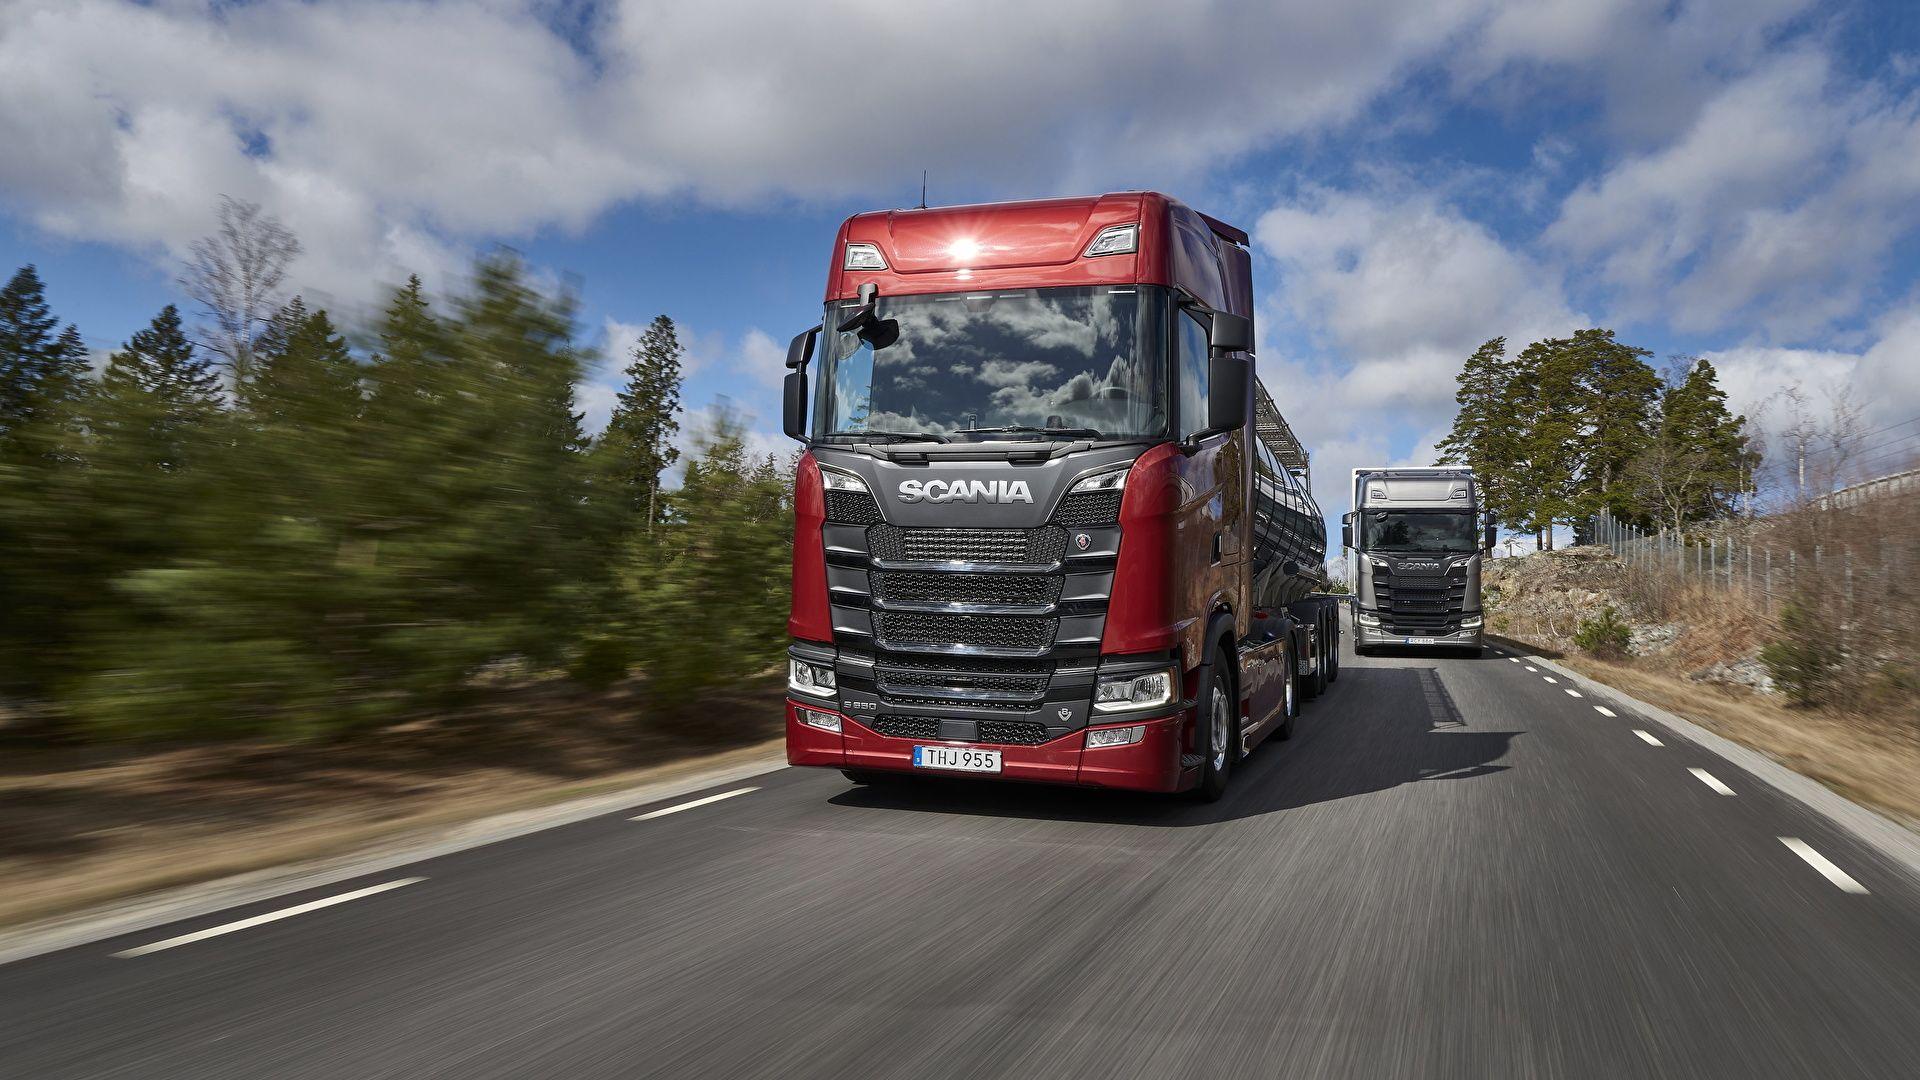 image Trucks Scania S 650 Red Motion Cars 1920x1080